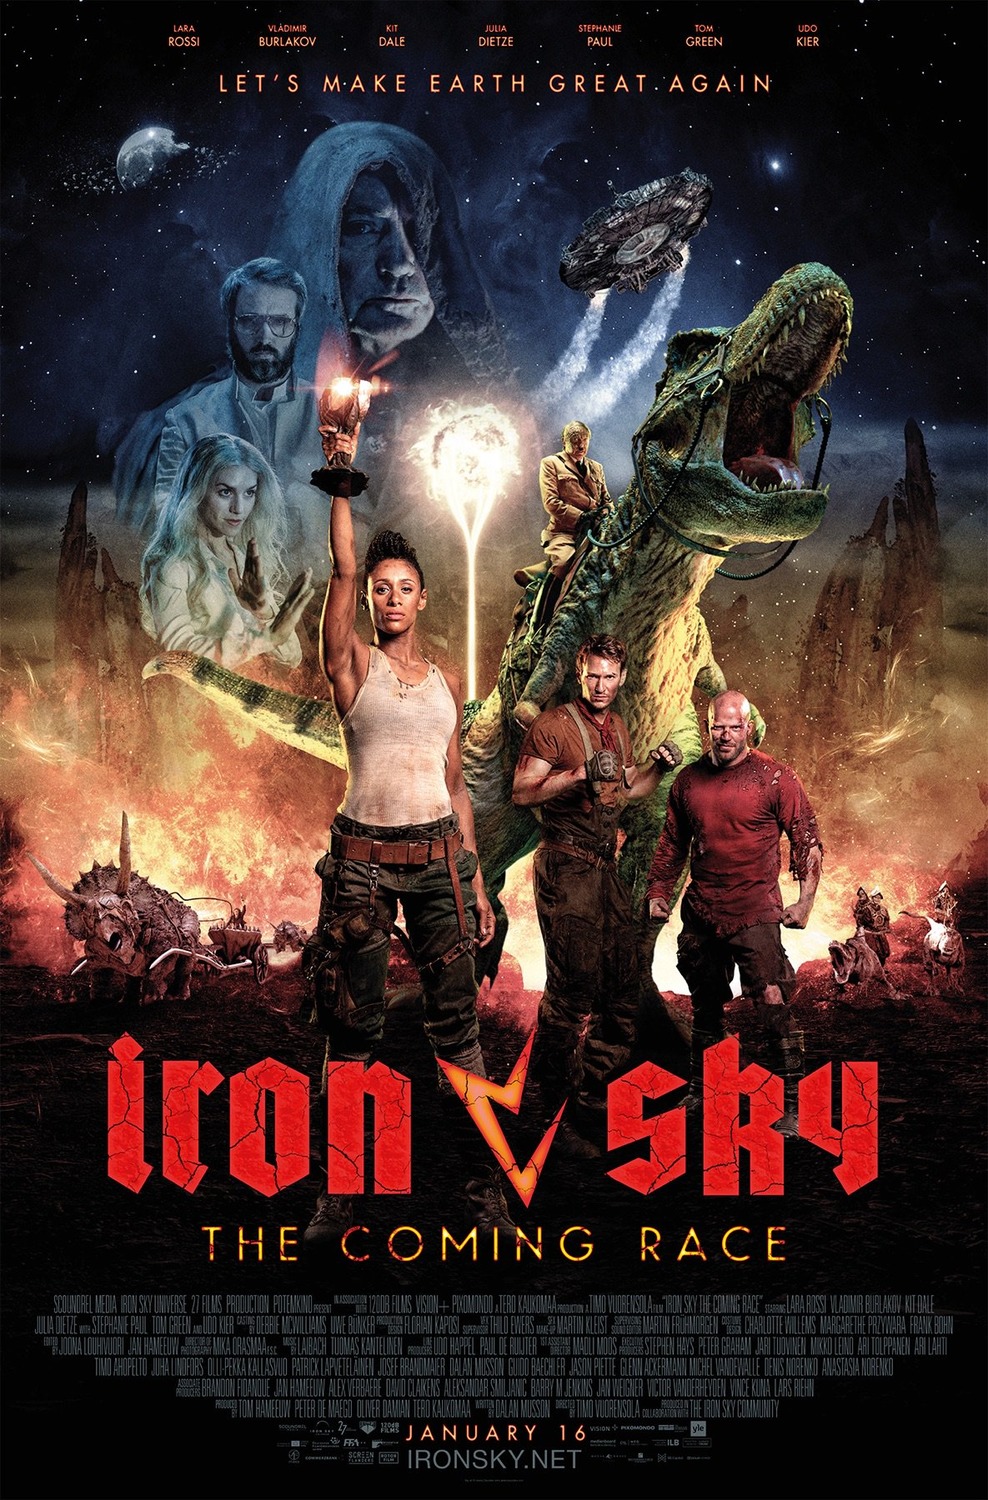 Extra Large Movie Poster Image for Iron Sky: The Coming Race (#1 of 3)